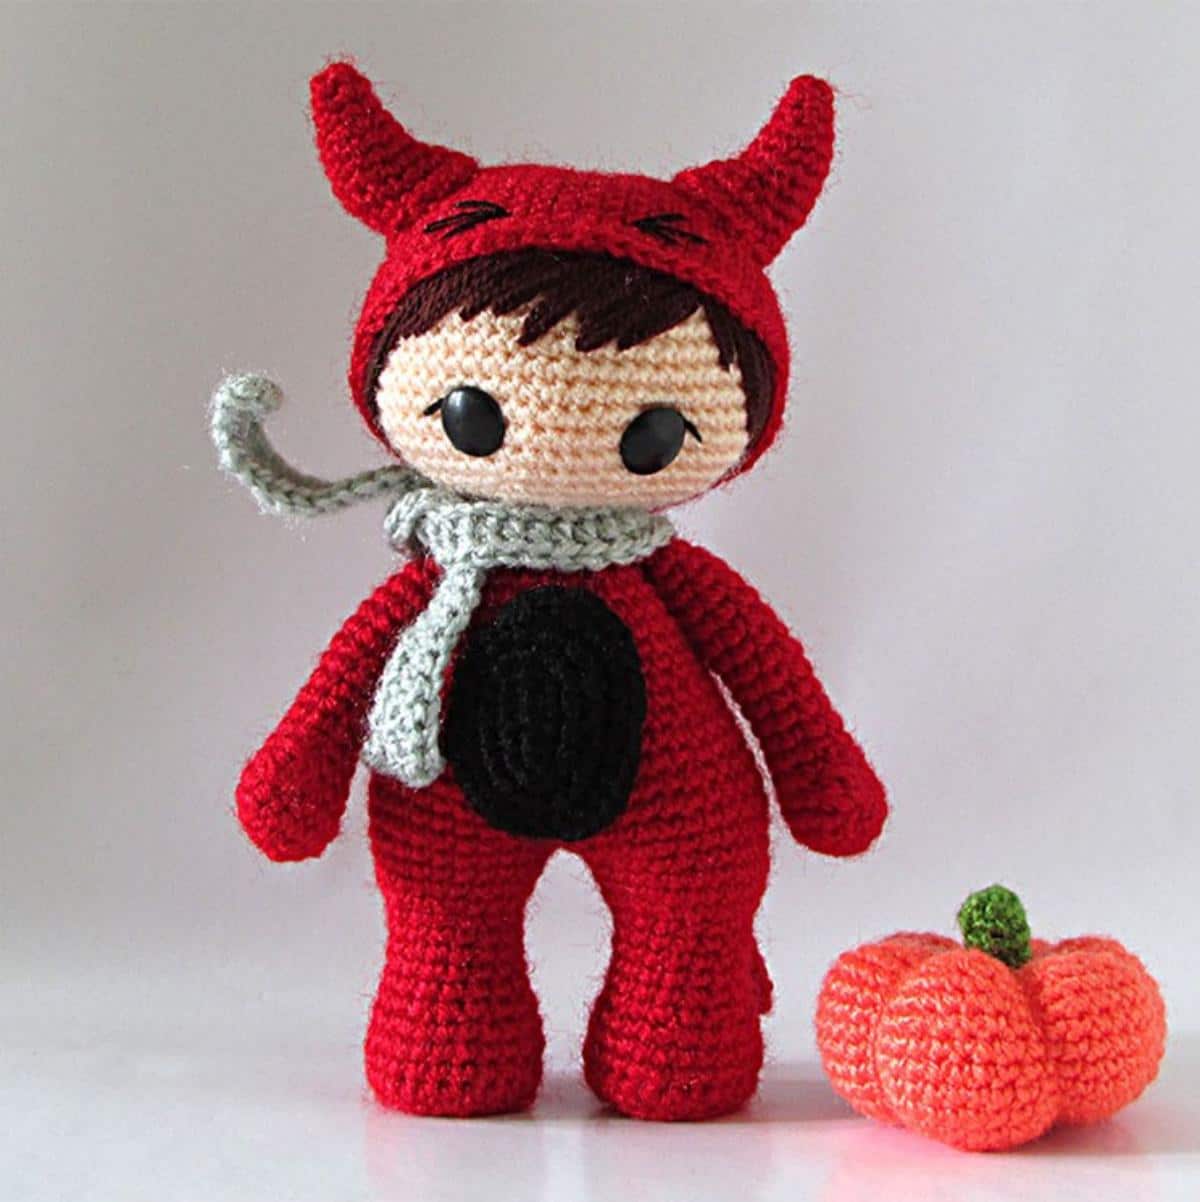 The Little Red Devil Doll